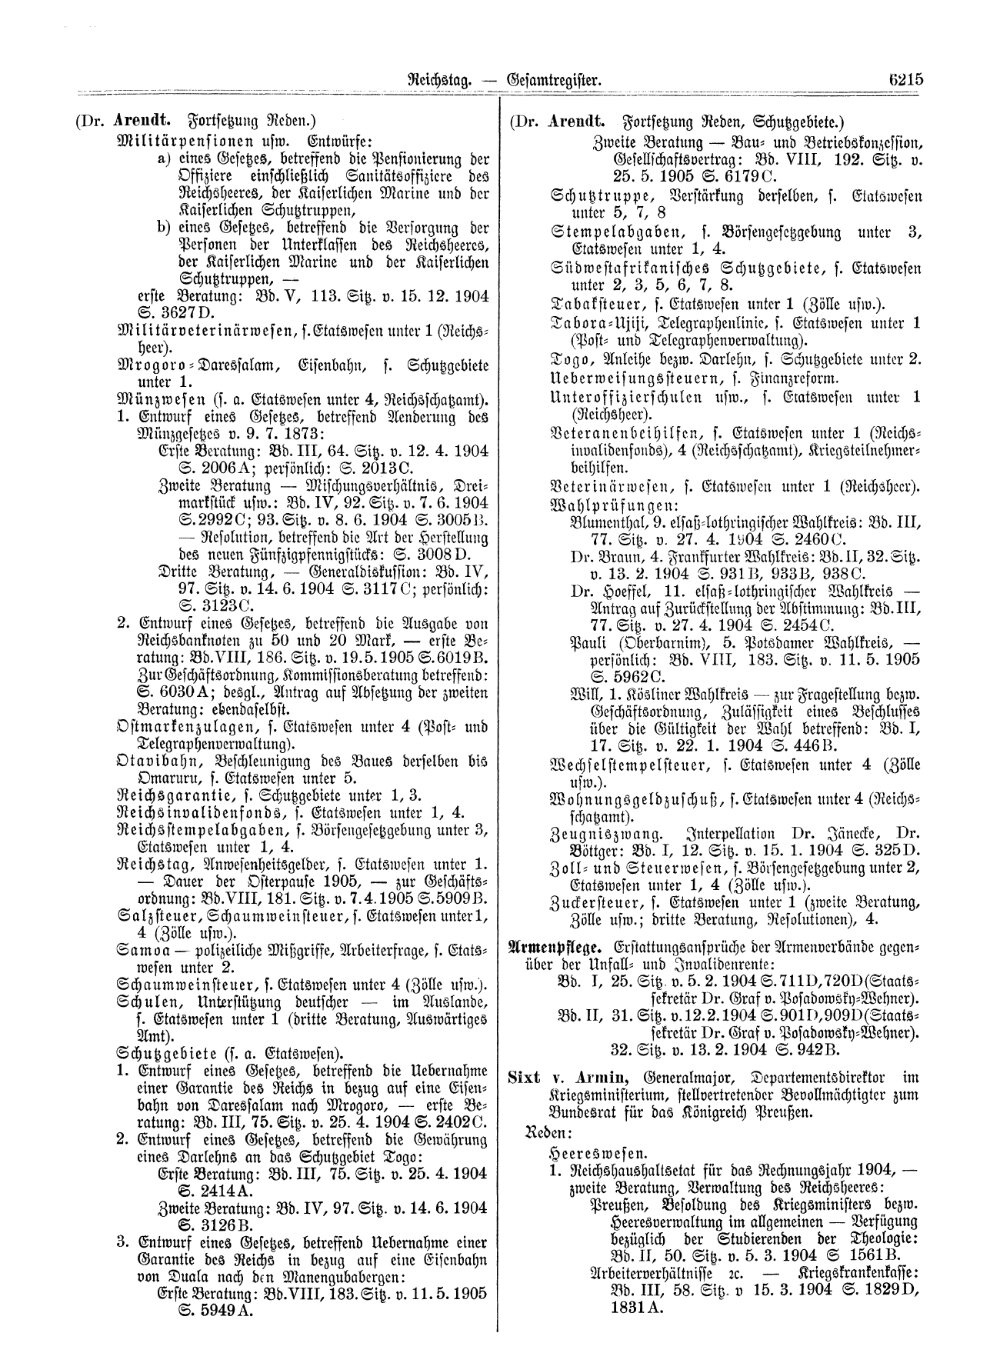 Scan of page 6215